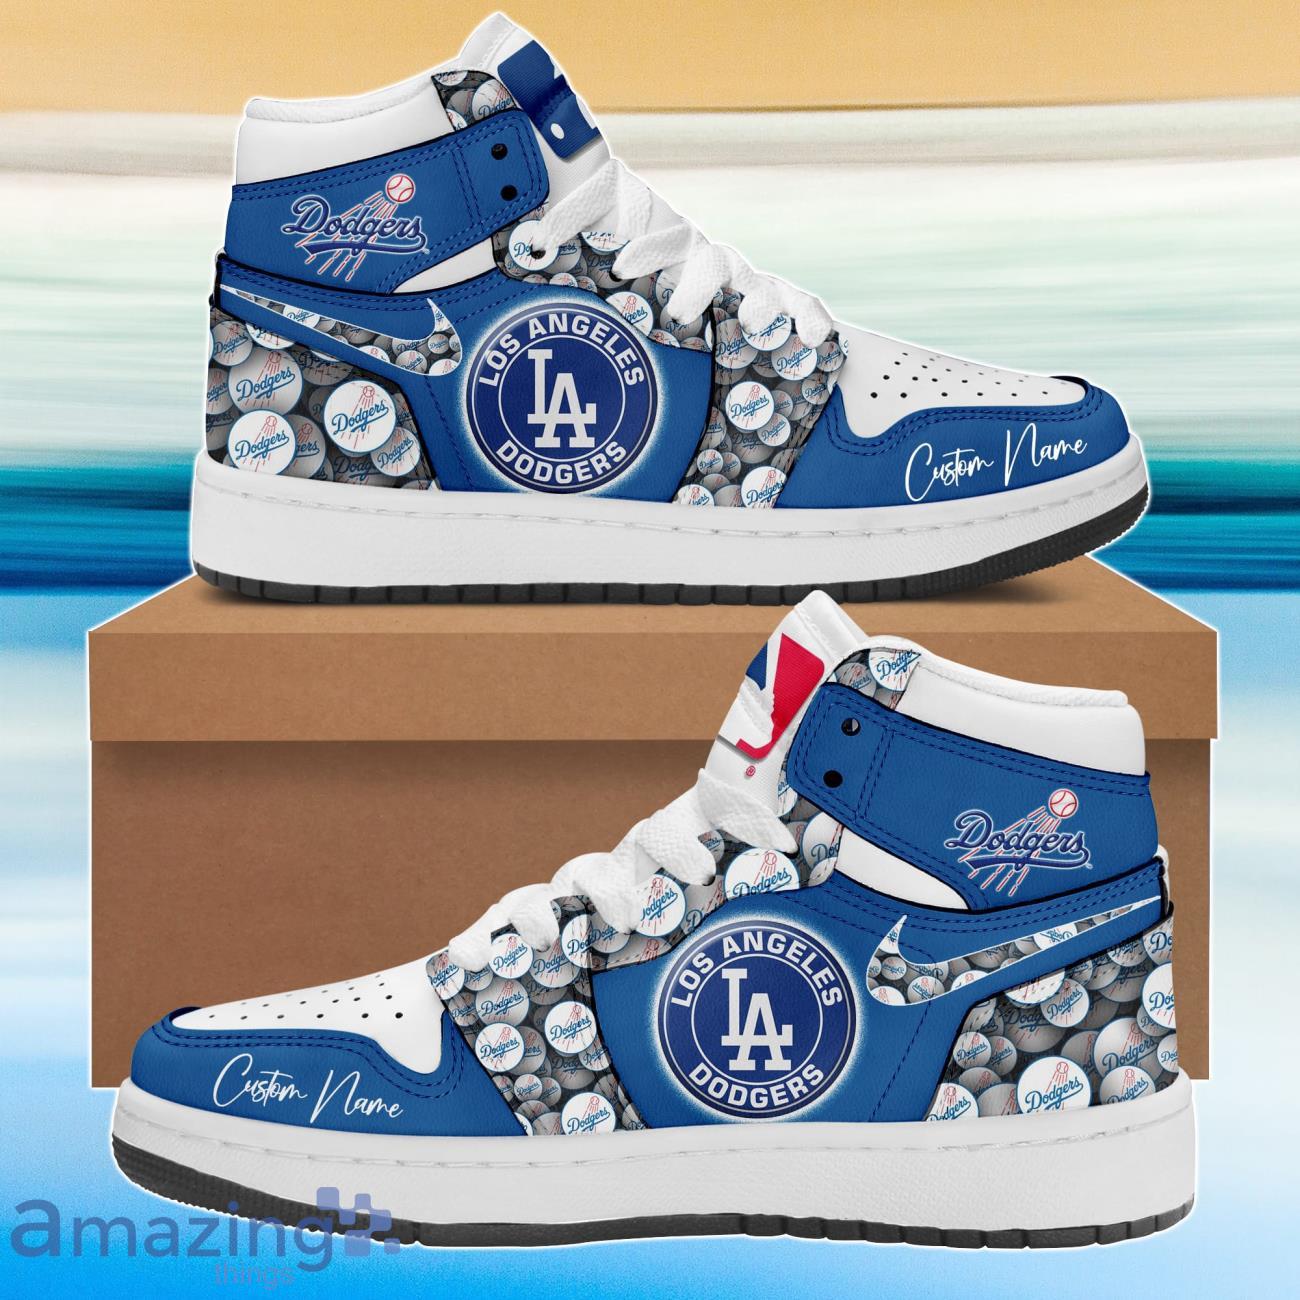 Los angeles dodgers max soul clunky shoes